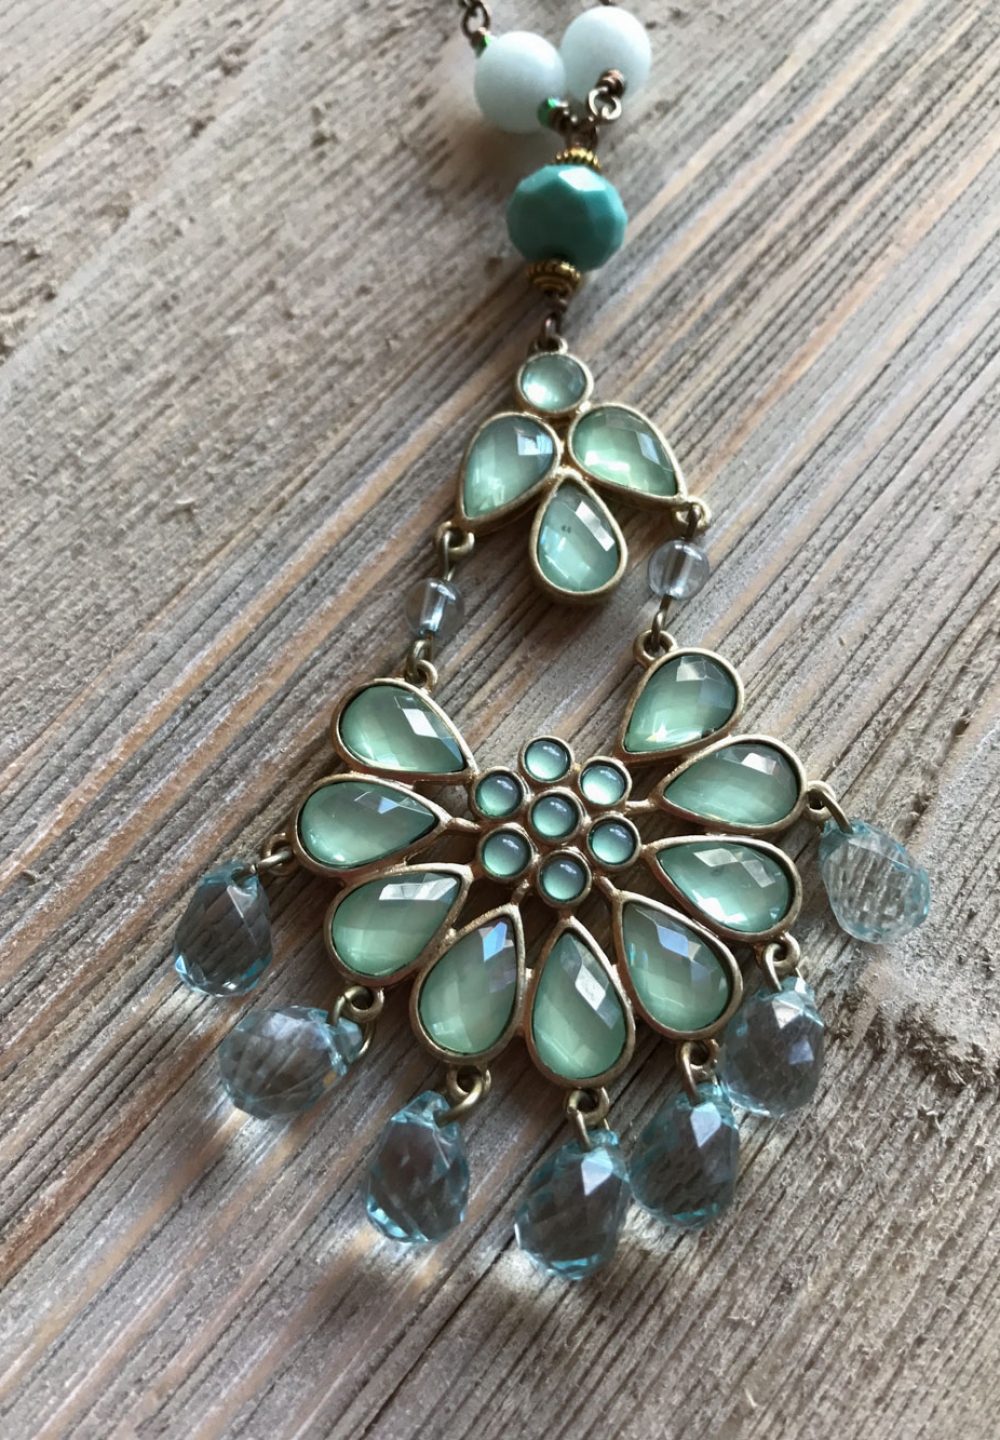 THREE LITTLE KITTENS | 3708n Amazonite and Costume Jewelry Pendant Necklace